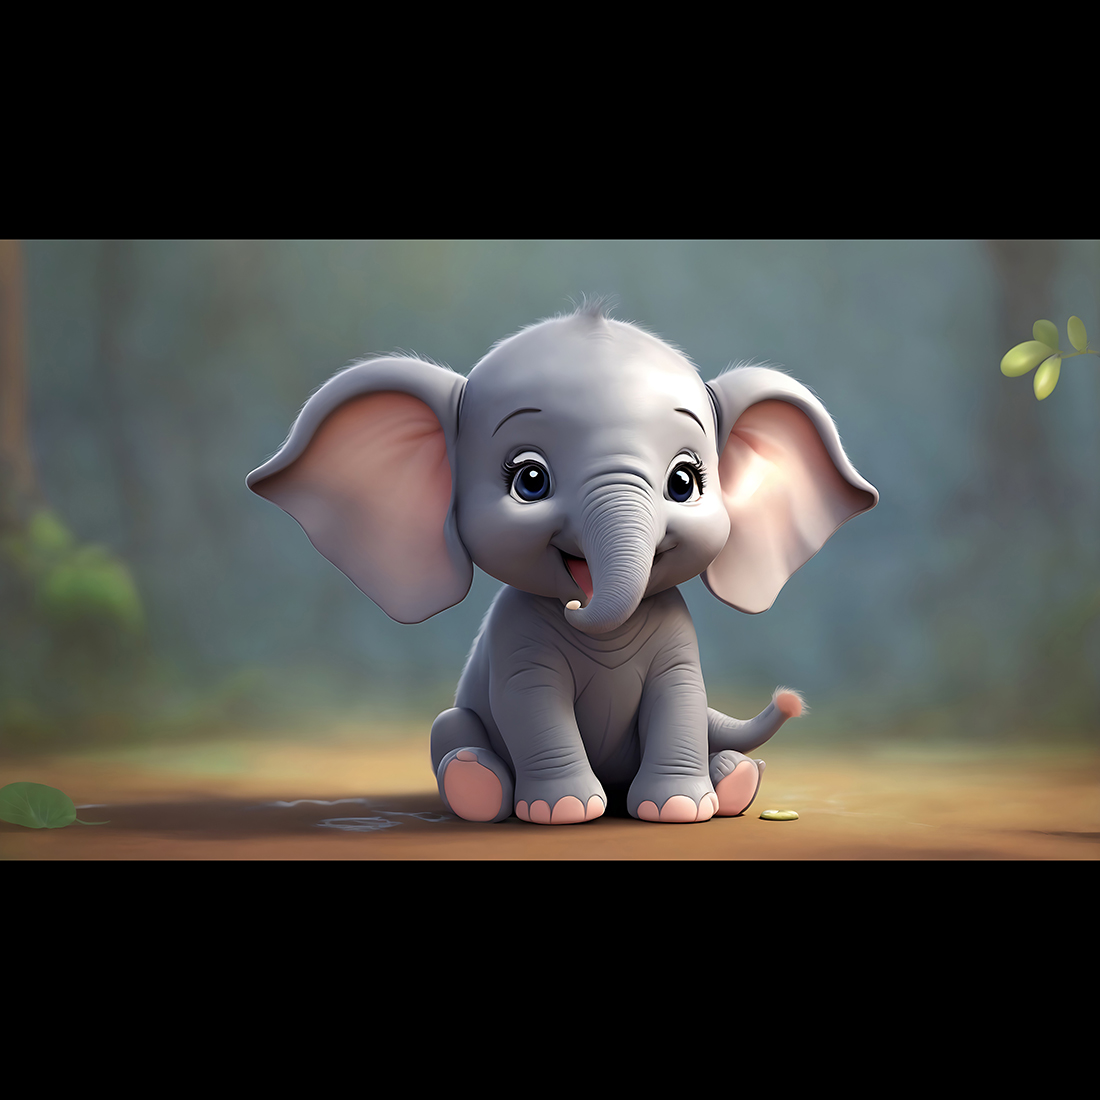 Adorable baby elephant with short tail sitting on the ground and staring at the camera ai generated preview image.